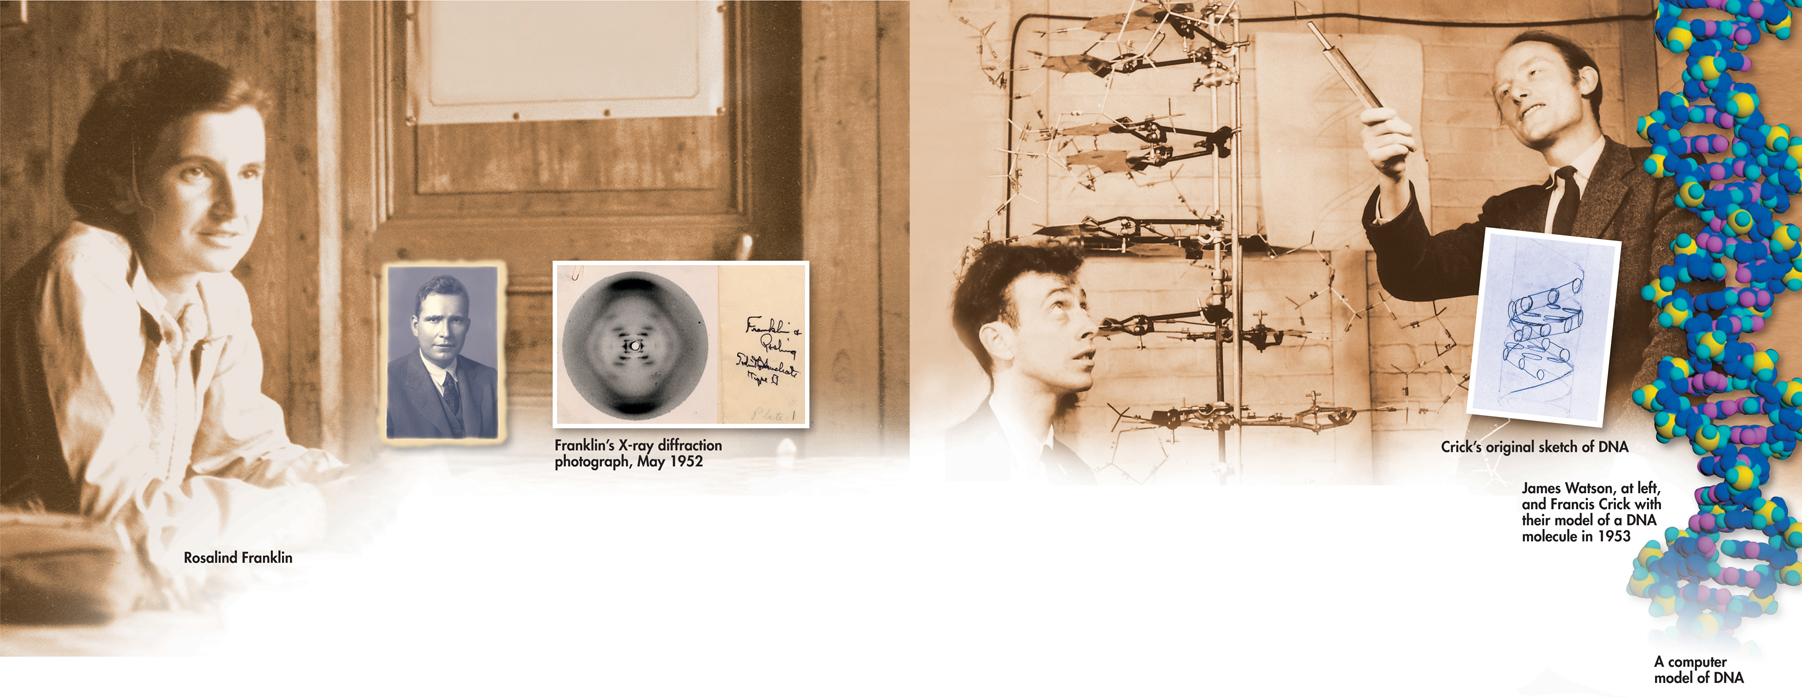 A photograph of Rosalind Franklin, Erwin Chargaff and Franklin’s X-ray diffraction from May 1952.